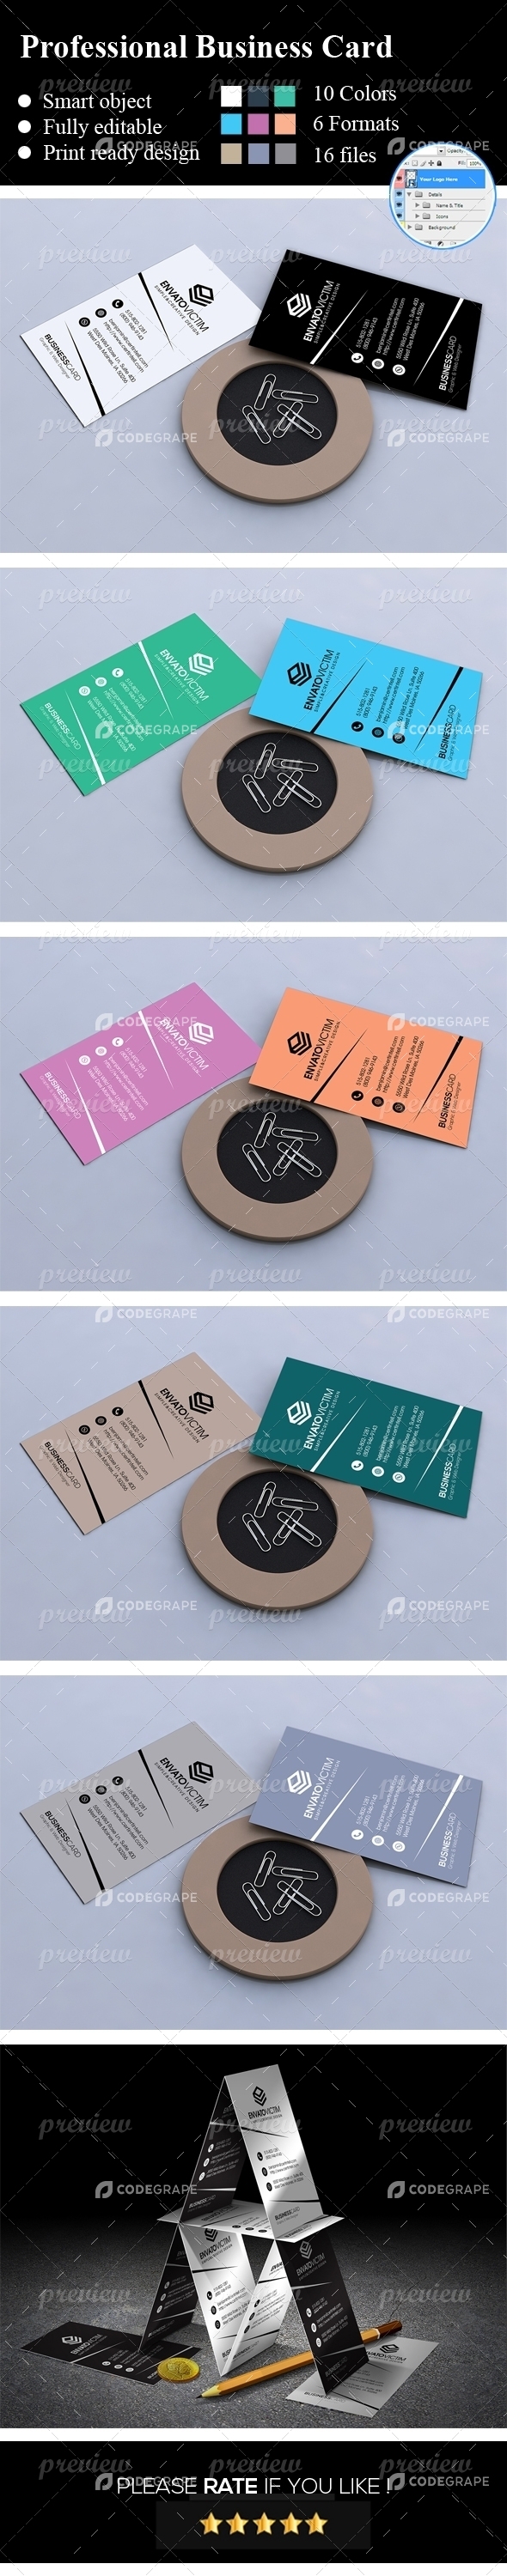 Professional Business Card 03